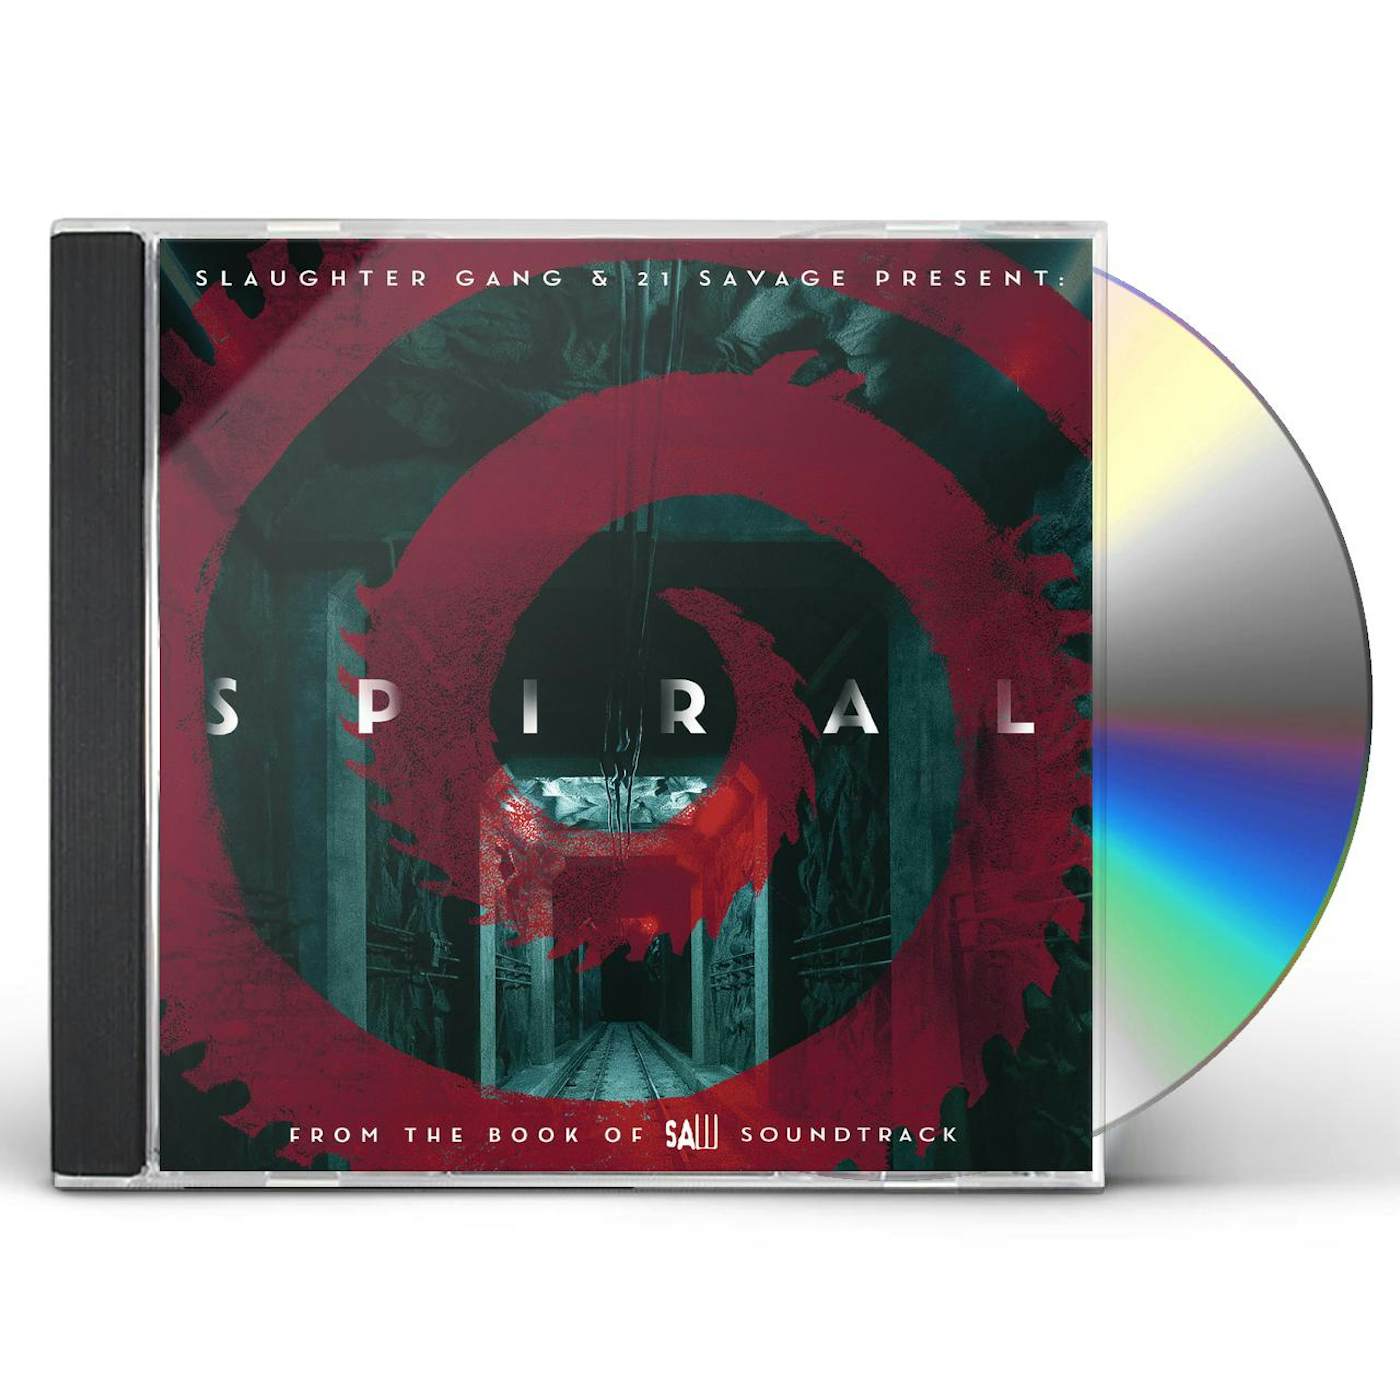 Spiral: From The Book of Saw Soundtrack CD - 21 Savage